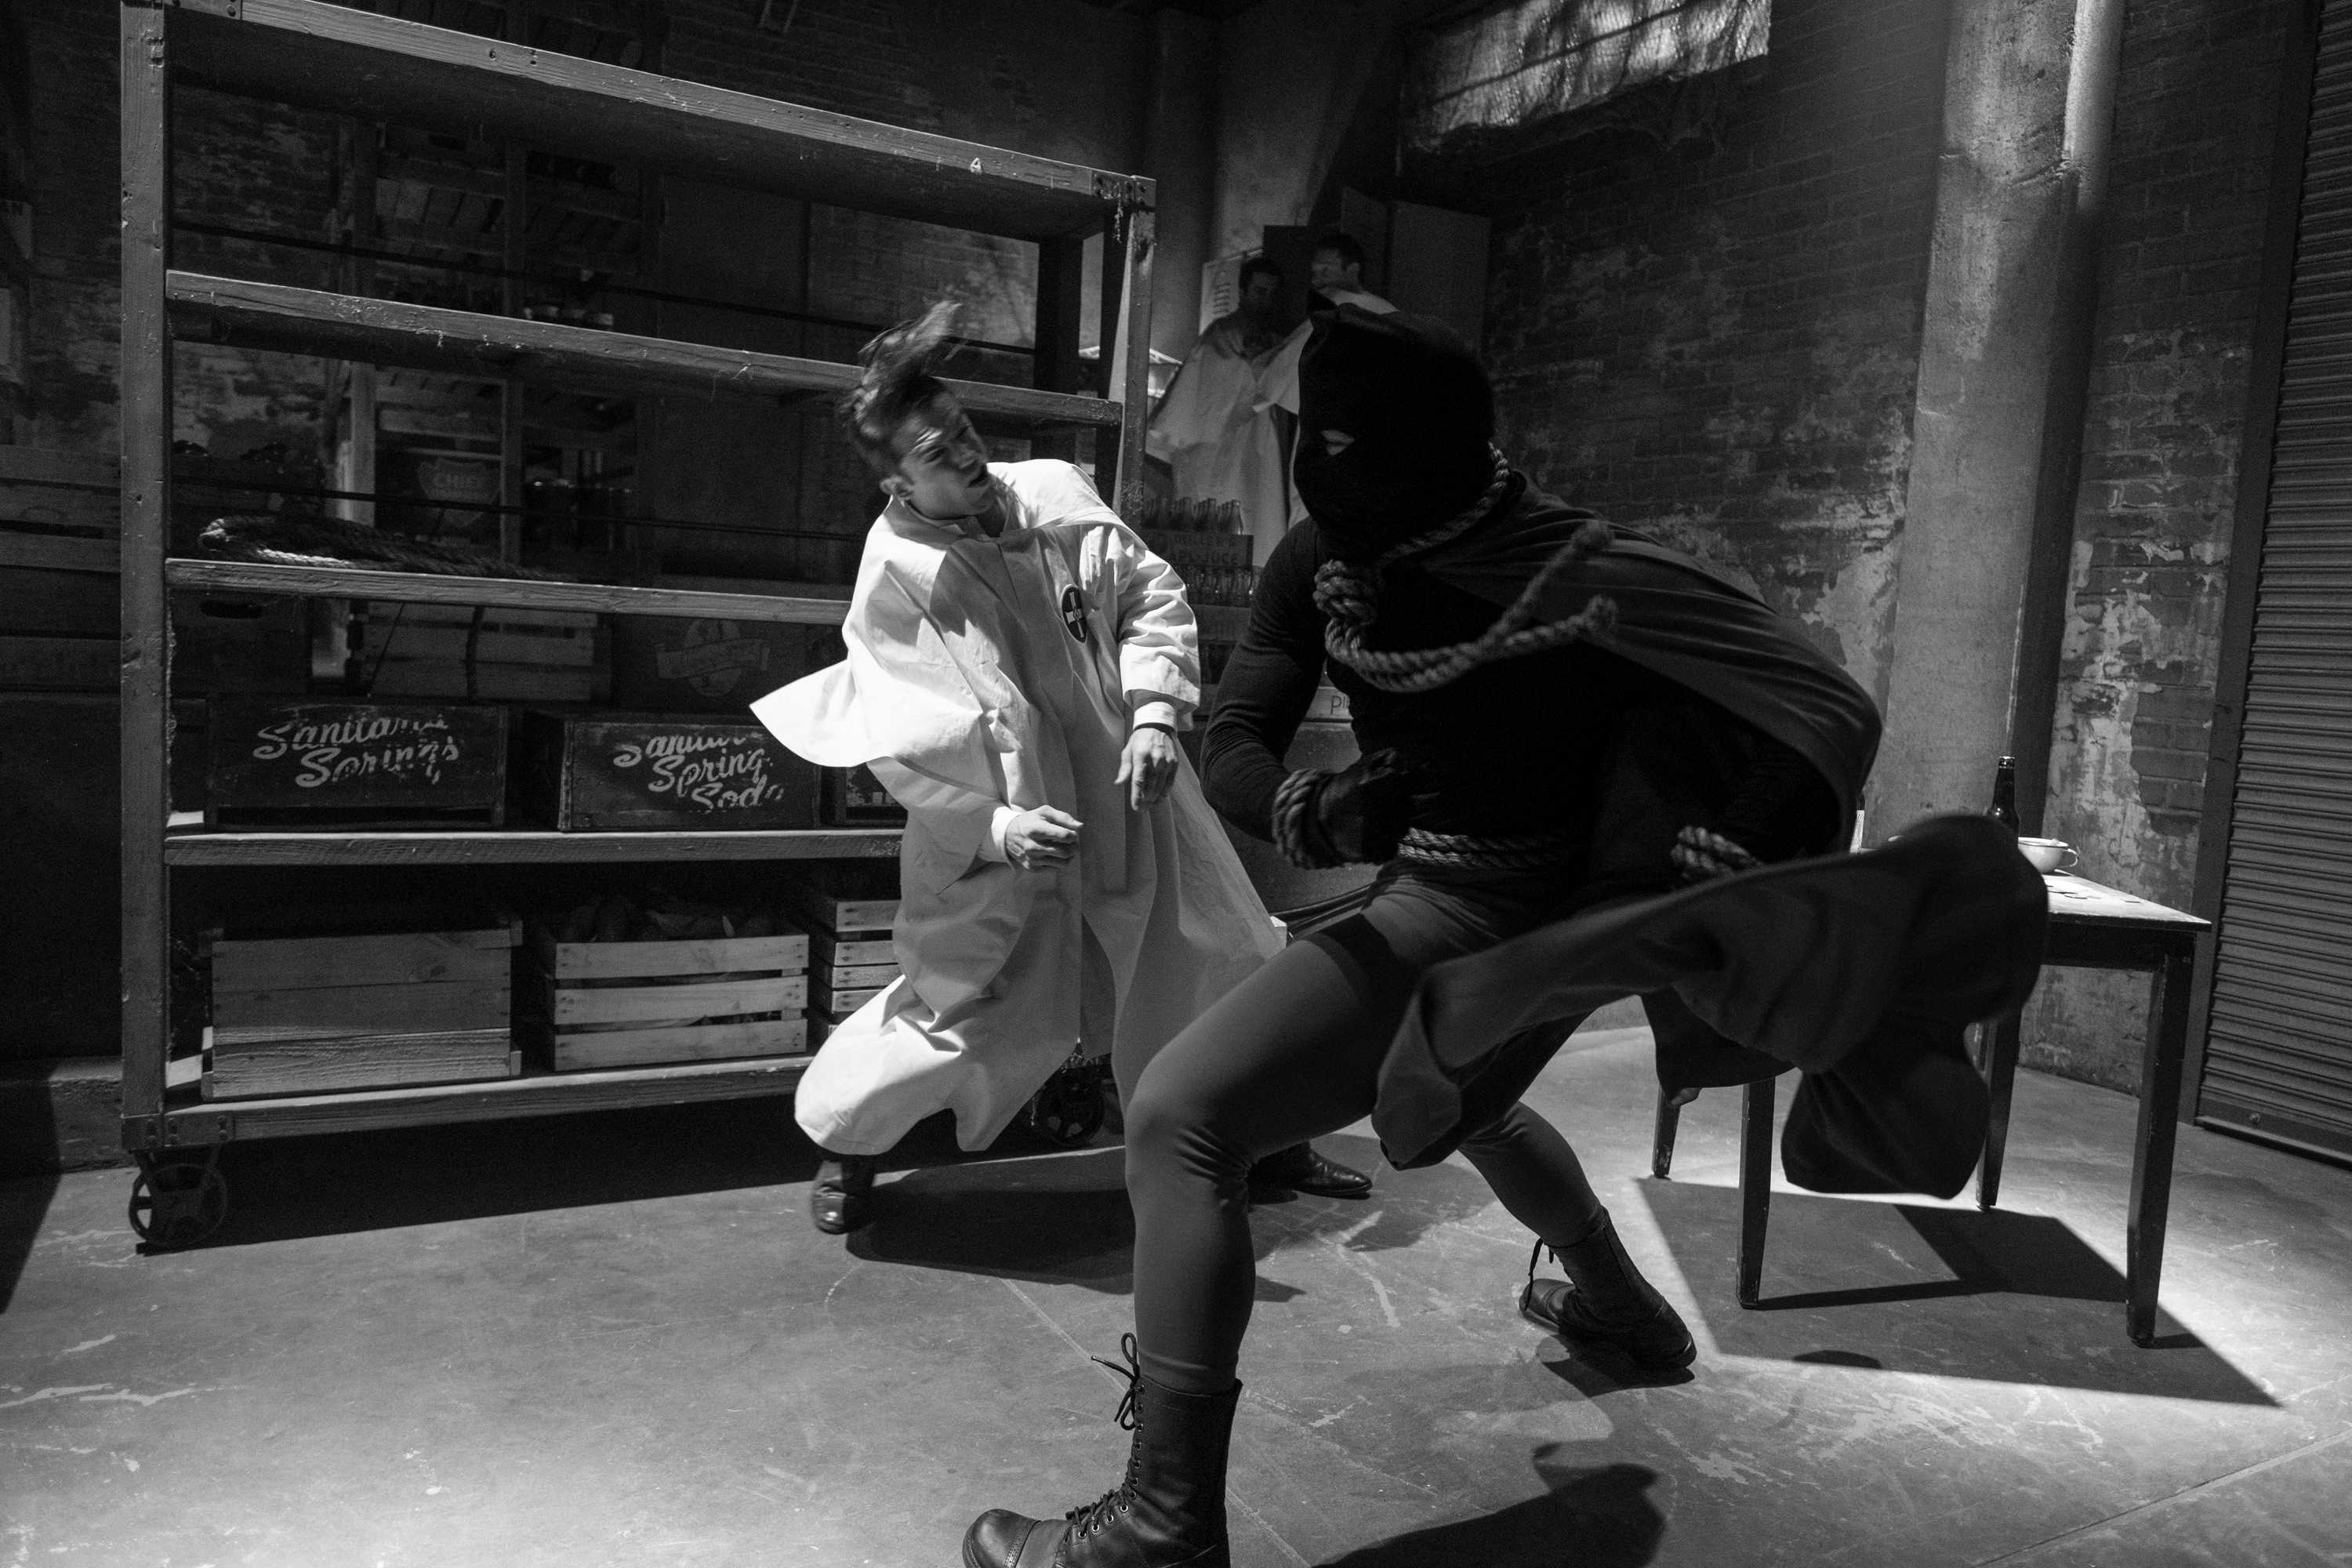 A black and white image of Hooded Justice mid fight. They are fighting a person dressed in white in a dark storage room.